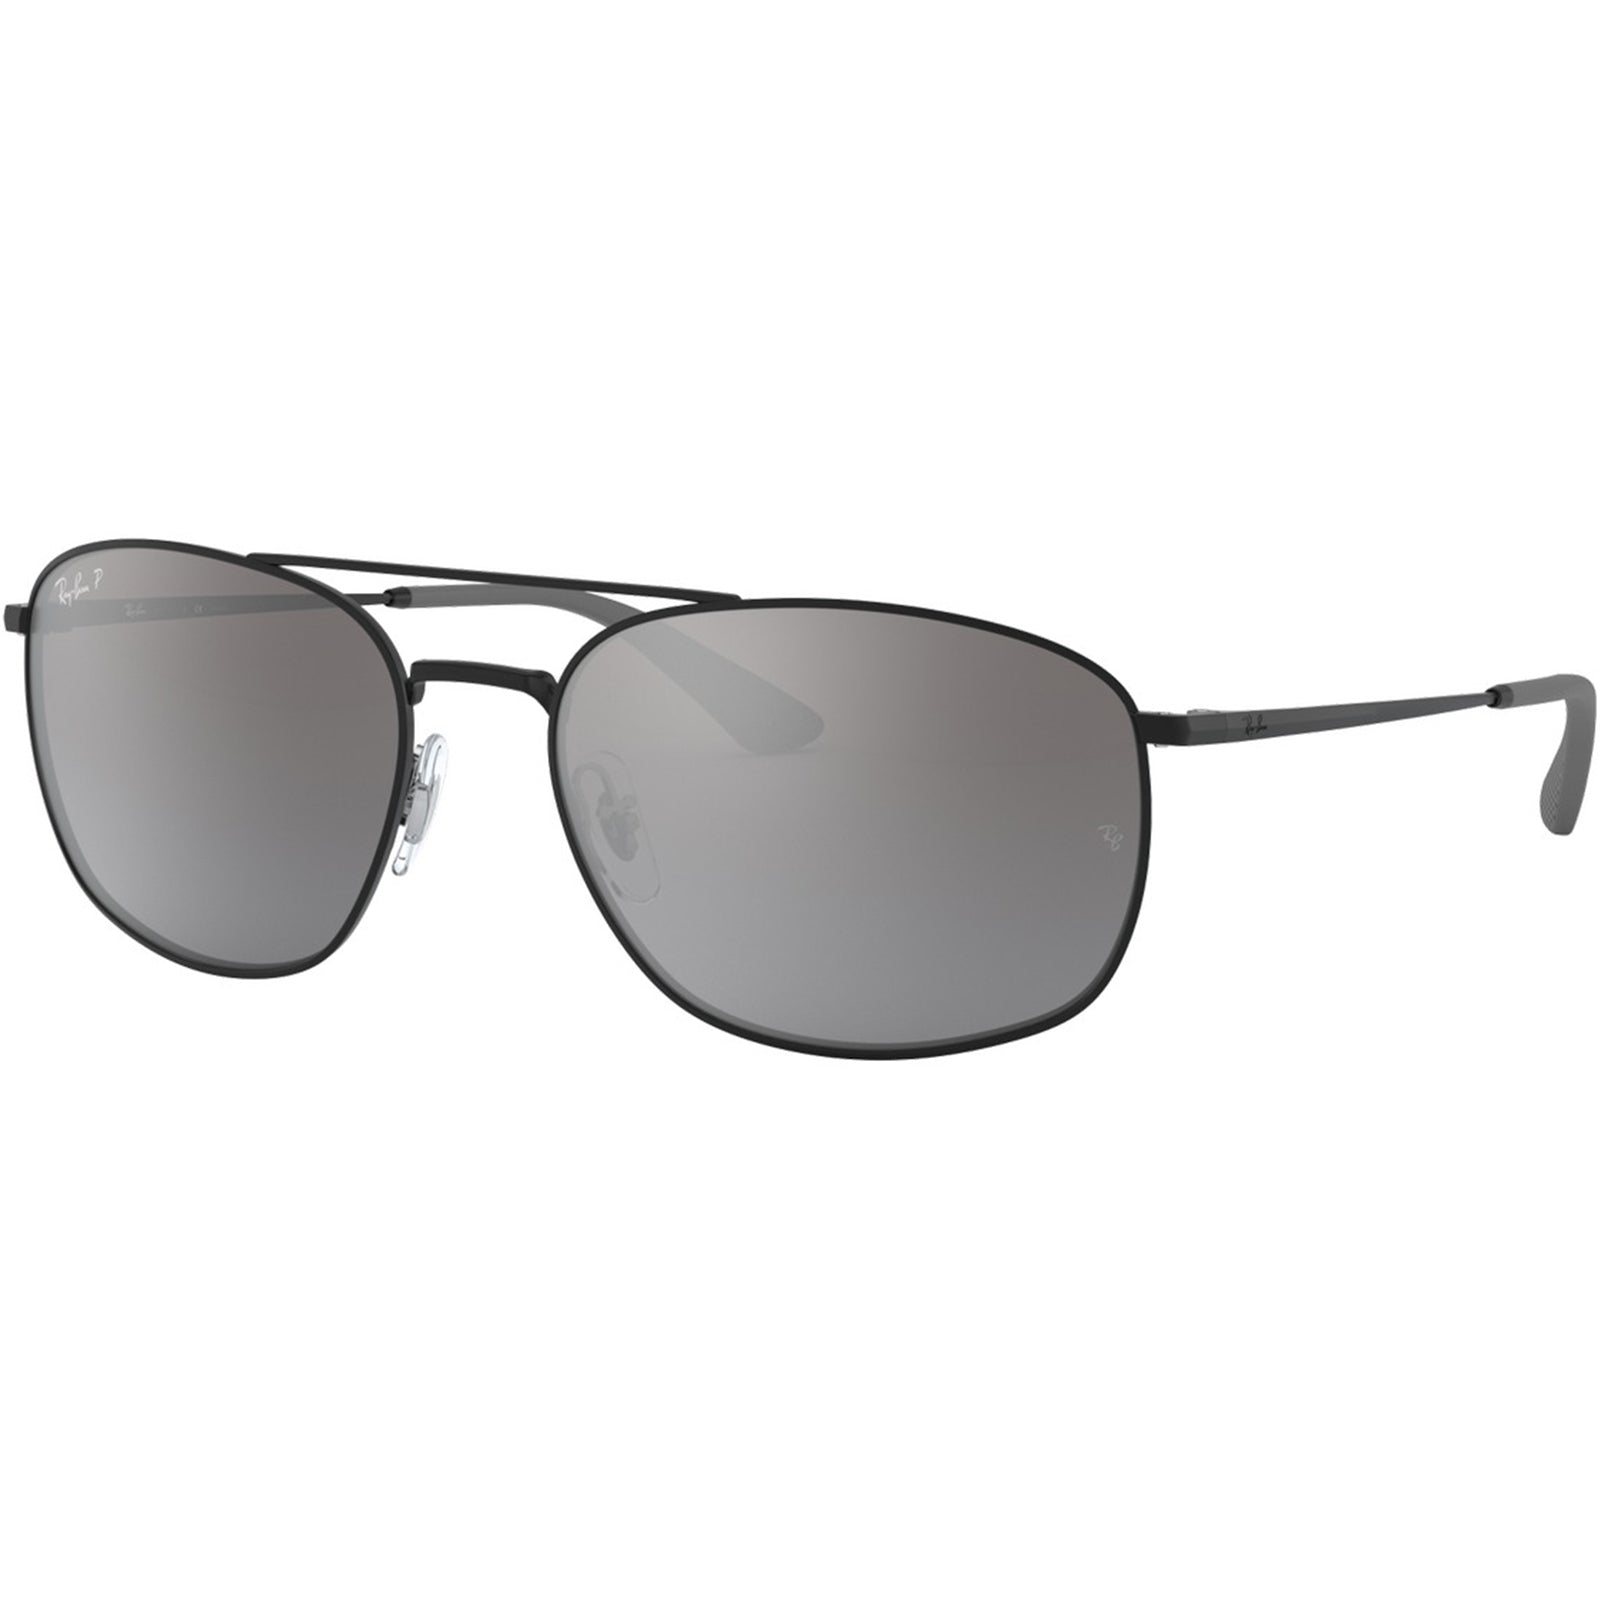 Ray-Ban RB3654 Men's Lifestyle Sunglasses-0RB3654